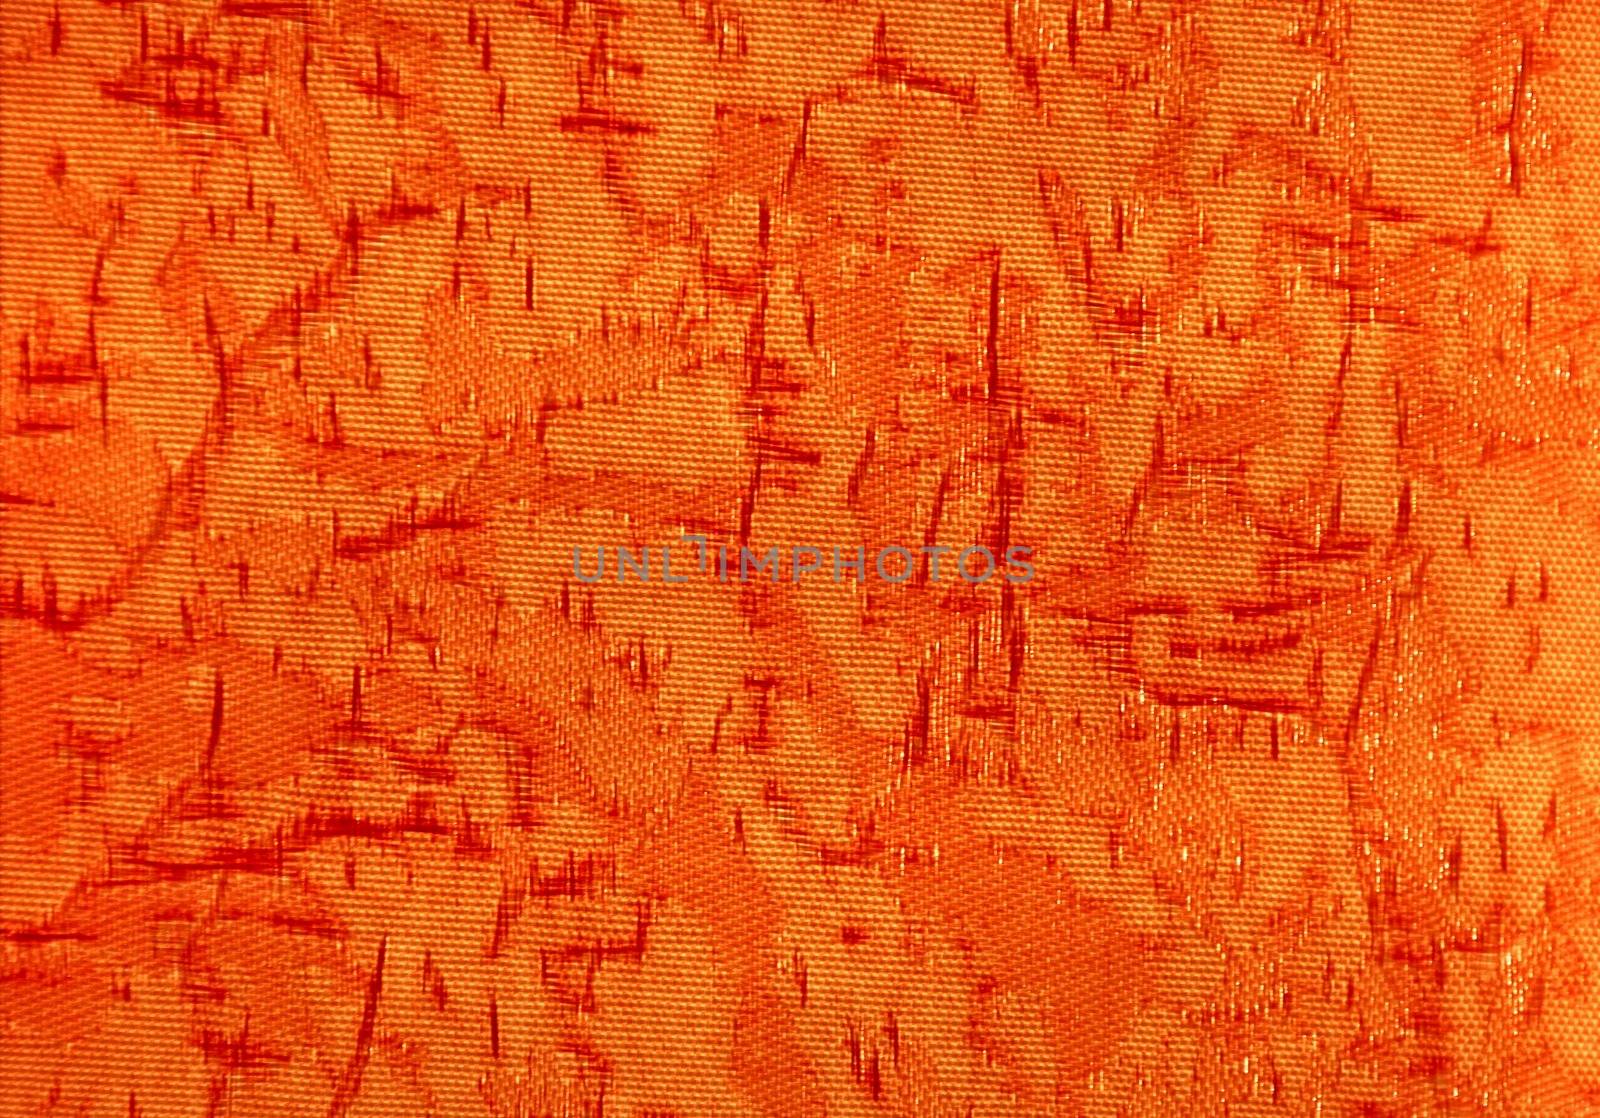 uneven orange fabric - texture. illuminating from beneath behind an object